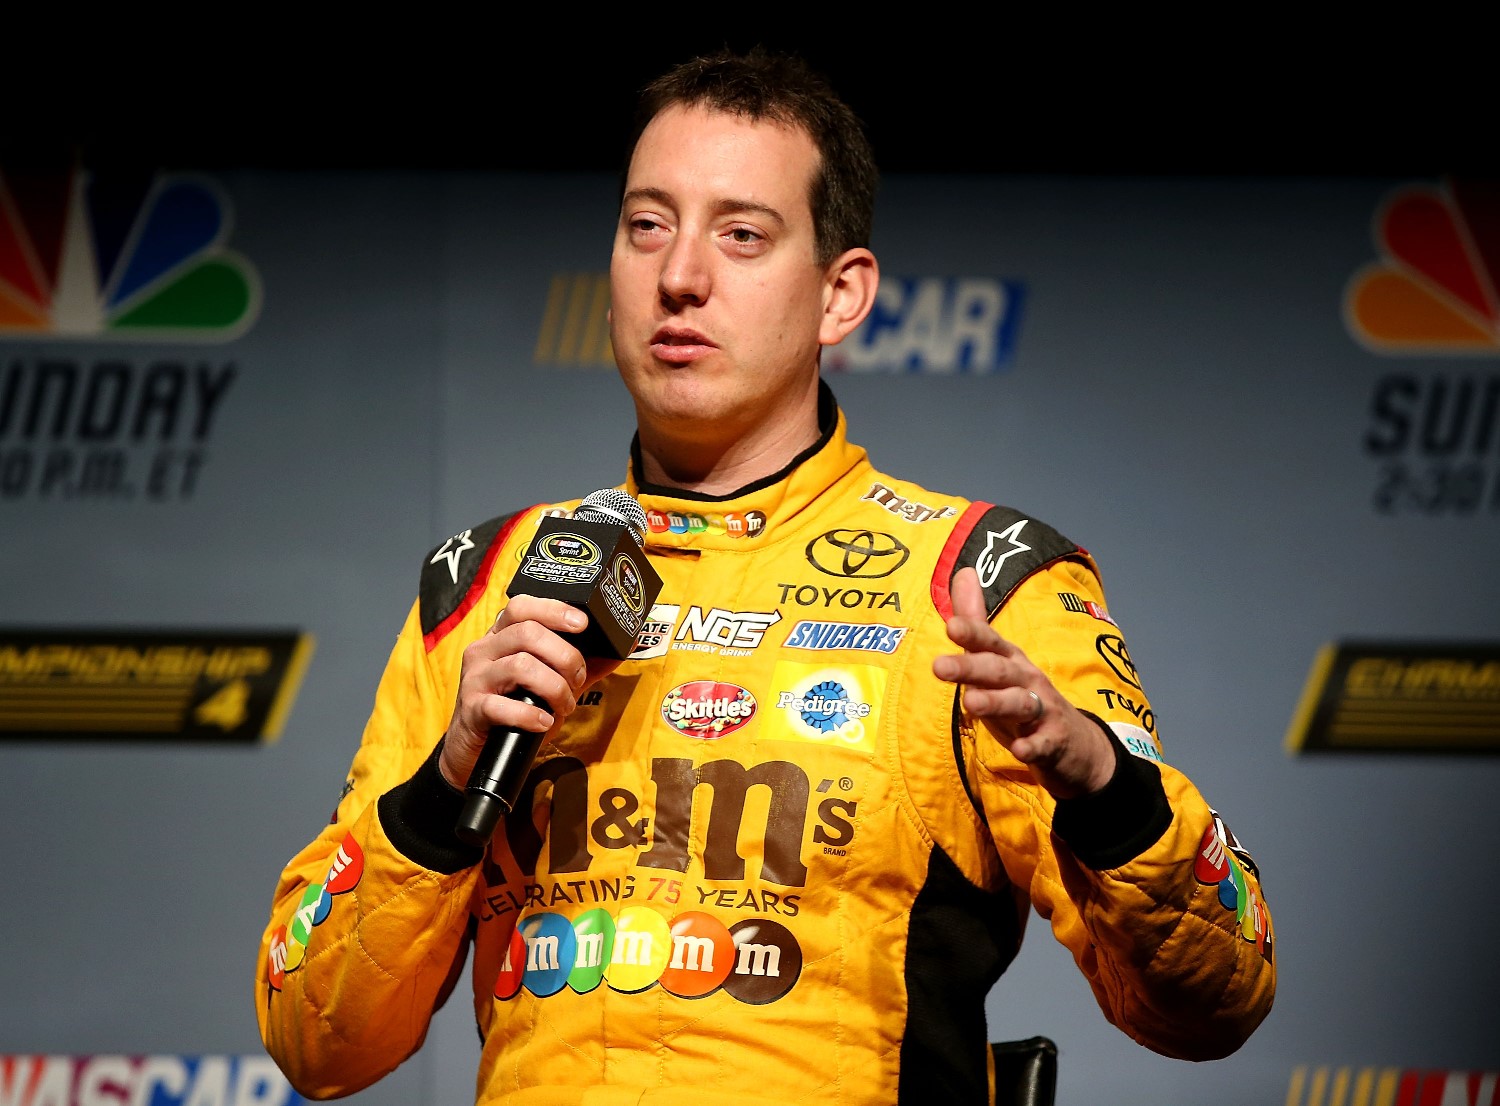 Defending champion Kyle Busch hopes to make it two in a row on Sunday